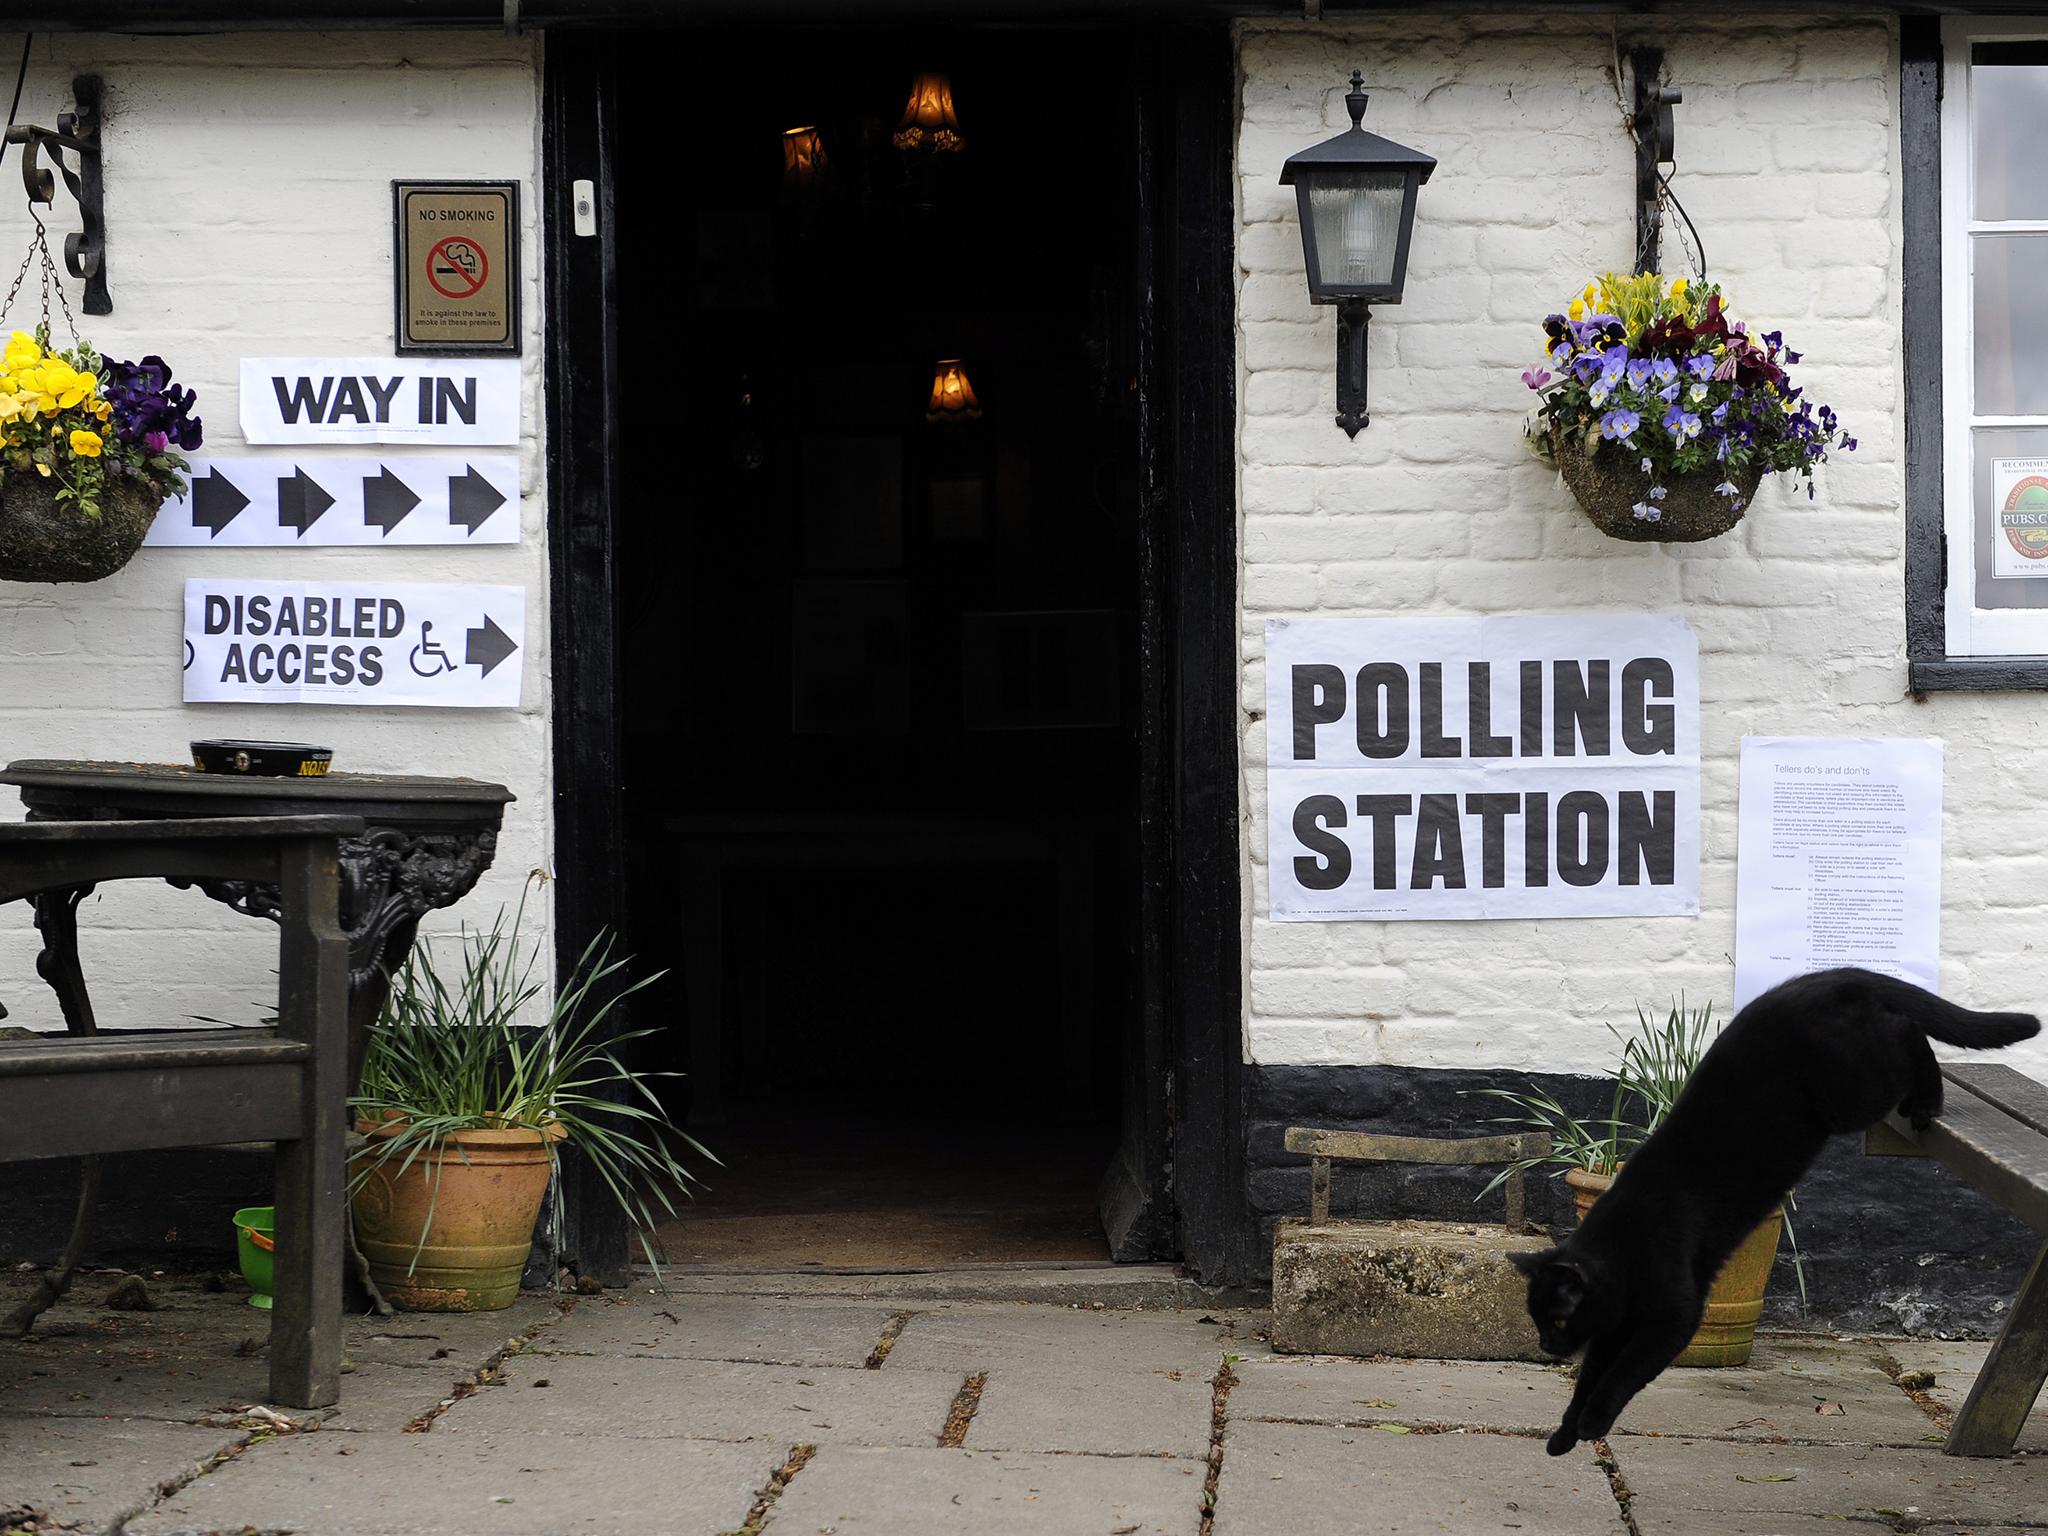 General election: Where the major parties stand on women's issues